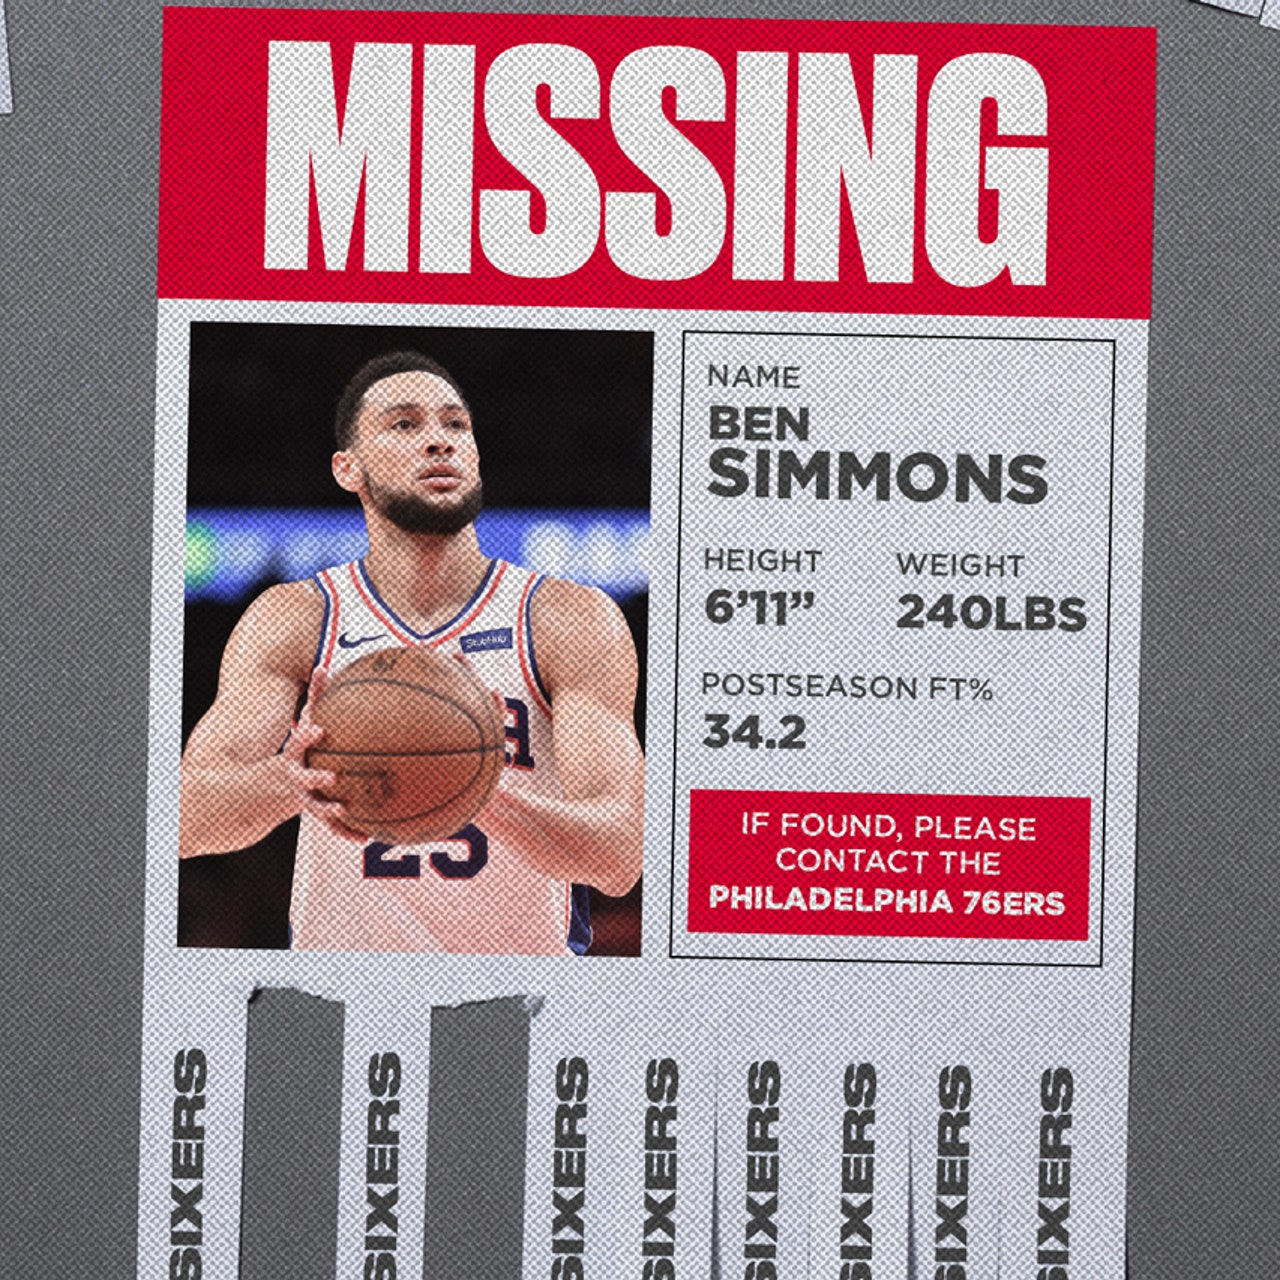 Sixers: Ben Simmons speaks on passed-up dunk in Hawks series